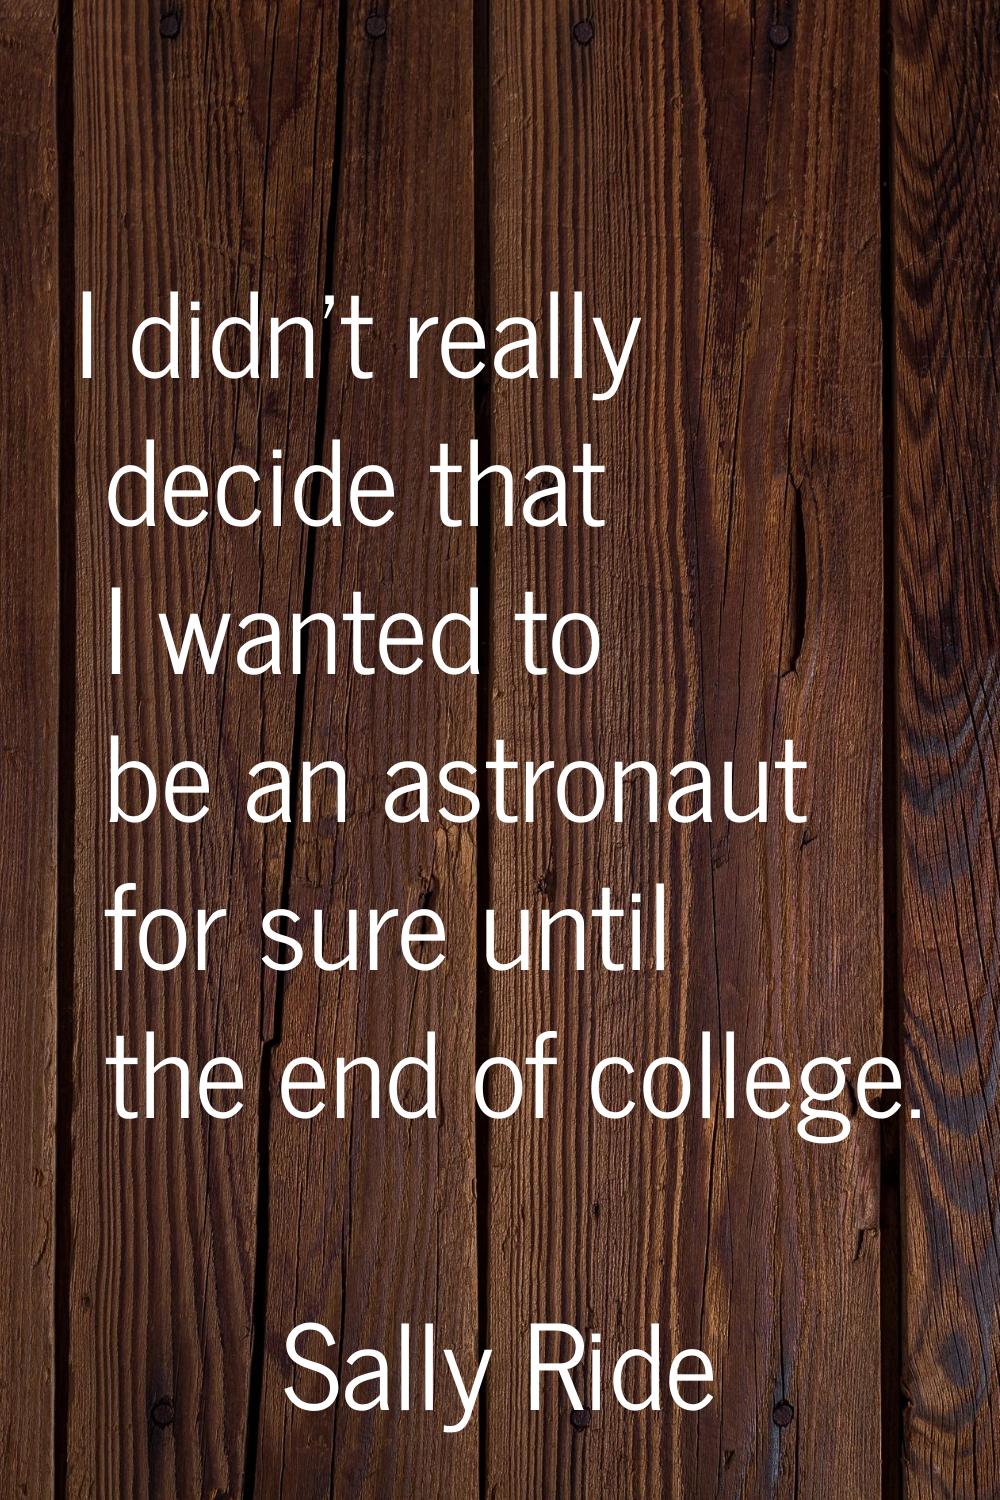 I didn't really decide that I wanted to be an astronaut for sure until the end of college.